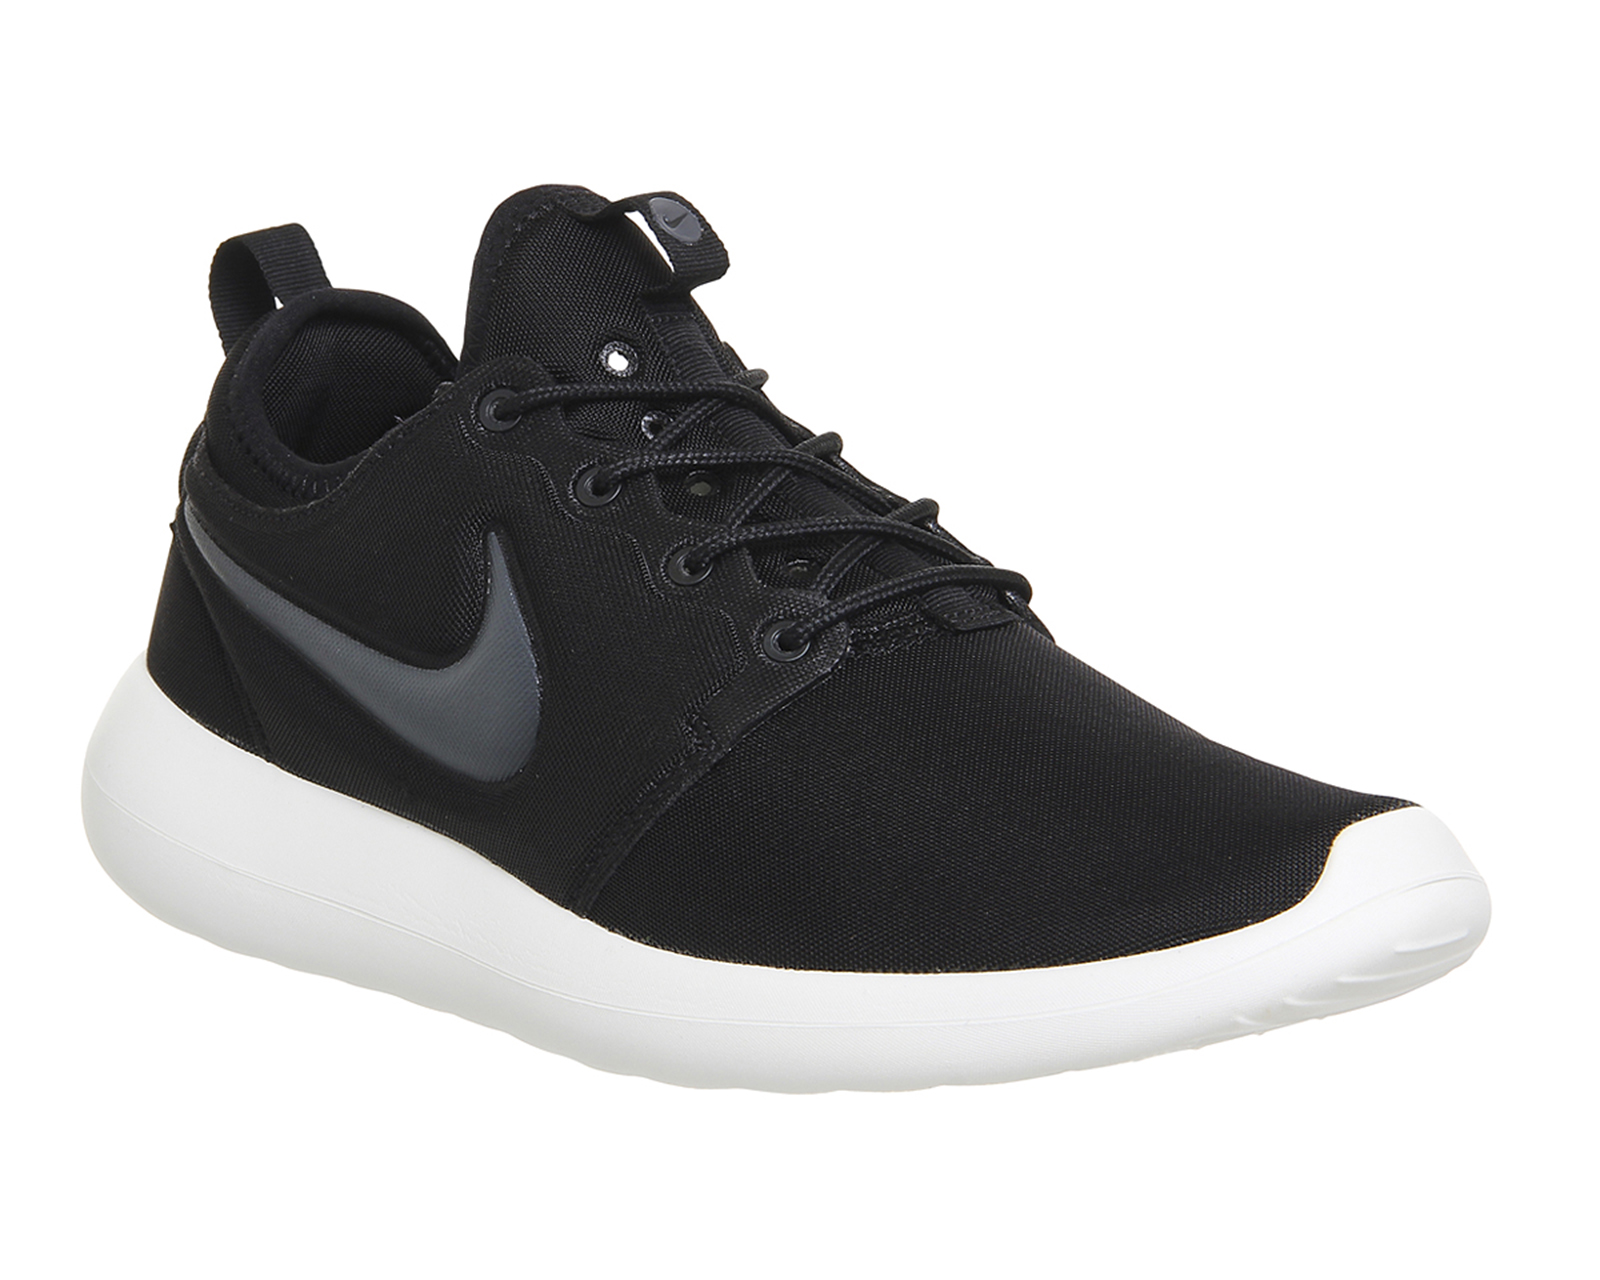 Nike Roshe Run Two Black Anthracite Sail - His trainers